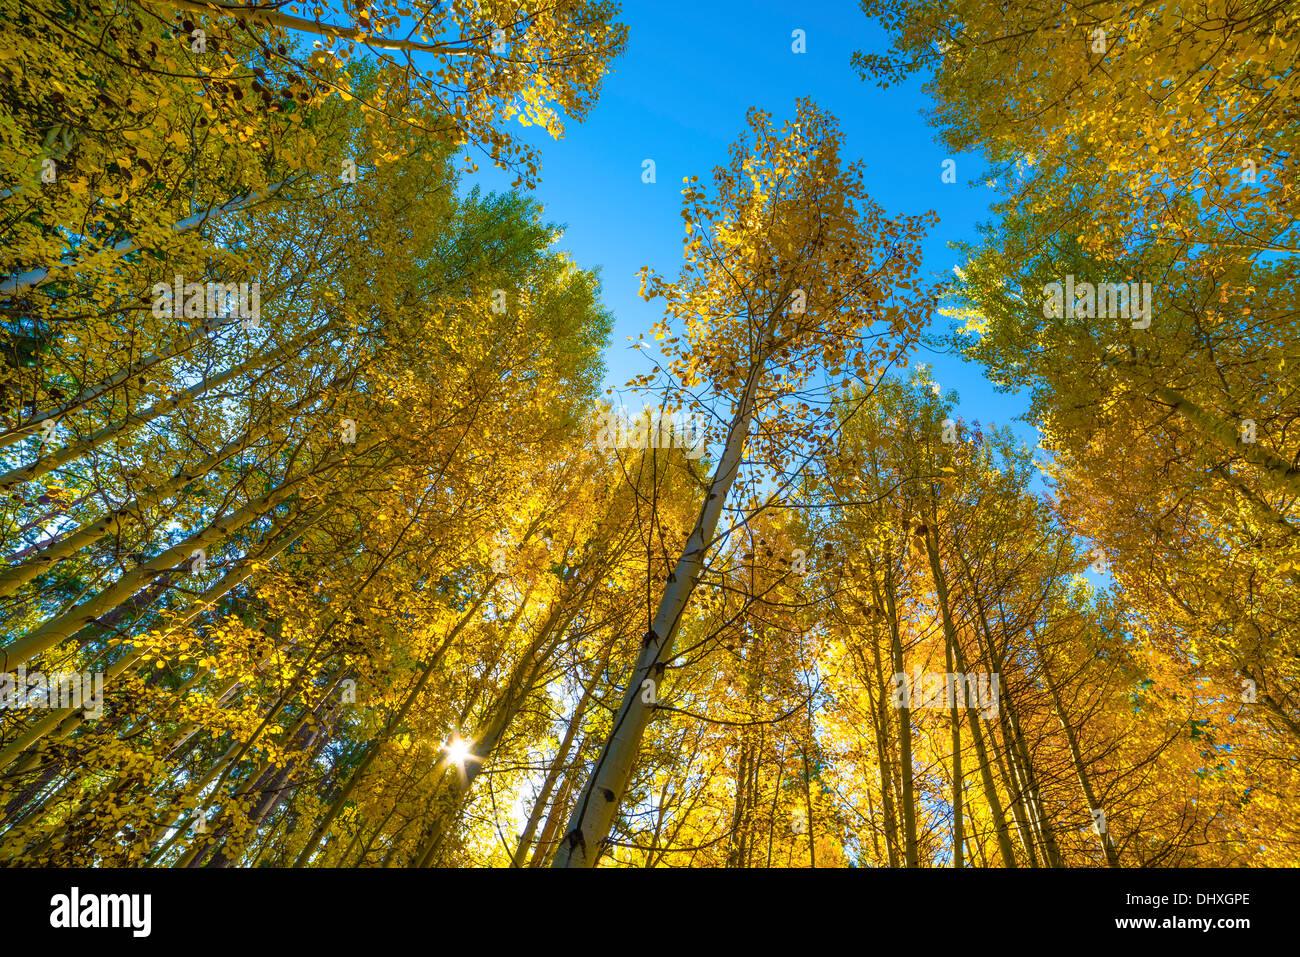 Aspen trees in fall color at Black Butte Ranch, central Oregon. Stock Photo